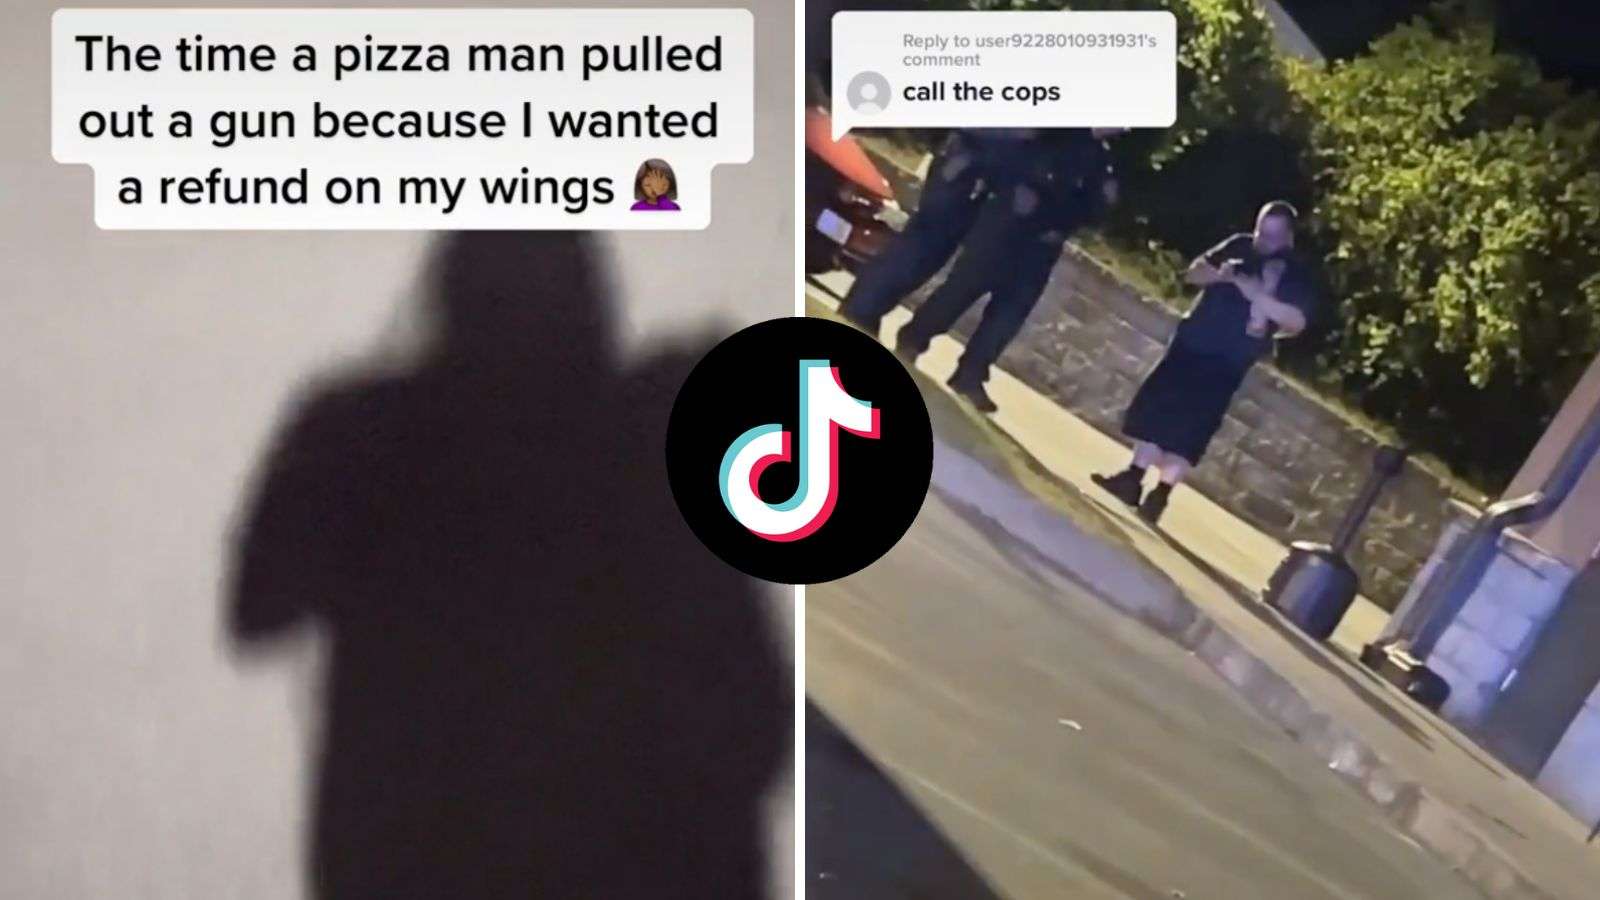 TikToker claims Marco's Pizza employee pulled gun on her after asking for refund